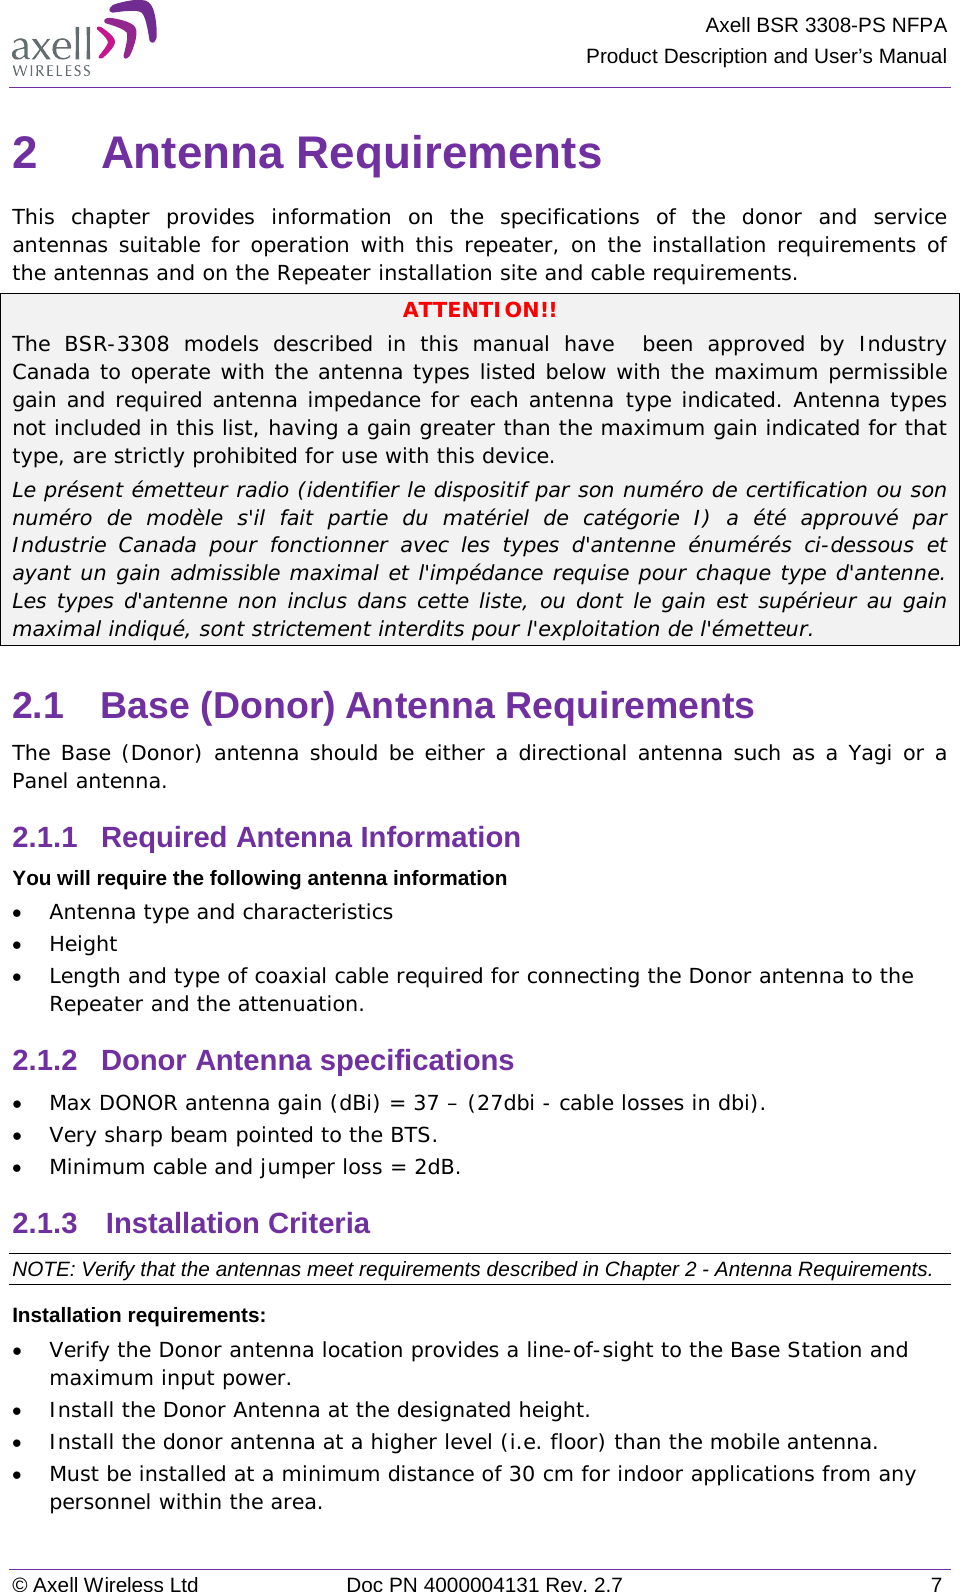 Axell BSR 3308-PS NFPA Product Description and User’s Manual © Axell Wireless Ltd Doc PN 4000004131 Rev. 2.7  7 2  Antenna Requirements  This chapter provides information on the specifications of the donor and service antennas suitable for operation with this repeater, on the installation requirements of the antennas and on the Repeater installation site and cable requirements. ATTENTION!! The  BSR-3308 models described in this manual have  been approved by Industry Canada to operate with the antenna types listed below with the maximum permissible gain and required antenna impedance for each antenna type indicated. Antenna types not included in this list, having a gain greater than the maximum gain indicated for that type, are strictly prohibited for use with this device. Le présent émetteur radio (identifier le dispositif par son numéro de certification ou son numéro de modèle s&apos;il fait partie du matériel de catégorie I) a été approuvé par Industrie Canada pour fonctionner avec les types d&apos;antenne énumérés ci-dessous et ayant un gain admissible maximal et l&apos;impédance requise pour chaque type d&apos;antenne. Les types d&apos;antenne non inclus dans cette liste, ou dont le gain est supérieur au gain maximal indiqué, sont strictement interdits pour l&apos;exploitation de l&apos;émetteur. 2.1  Base (Donor) Antenna Requirements The Base (Donor) antenna should be either a directional antenna such as a Yagi or a Panel antenna. 2.1.1  Required Antenna Information You will require the following antenna information • Antenna type and characteristics • Height • Length and type of coaxial cable required for connecting the Donor antenna to the Repeater and the attenuation. 2.1.2  Donor Antenna specifications • Max DONOR antenna gain (dBi) = 37 – (27dbi - cable losses in dbi). • Very sharp beam pointed to the BTS. • Minimum cable and jumper loss = 2dB. 2.1.3  Installation Criteria  NOTE: Verify that the antennas meet requirements described in Chapter  2 - Antenna Requirements. Installation requirements: • Verify the Donor antenna location provides a line-of-sight to the Base Station and maximum input power. • Install the Donor Antenna at the designated height. • Install the donor antenna at a higher level (i.e. floor) than the mobile antenna. • Must be installed at a minimum distance of 30 cm for indoor applications from any personnel within the area. 